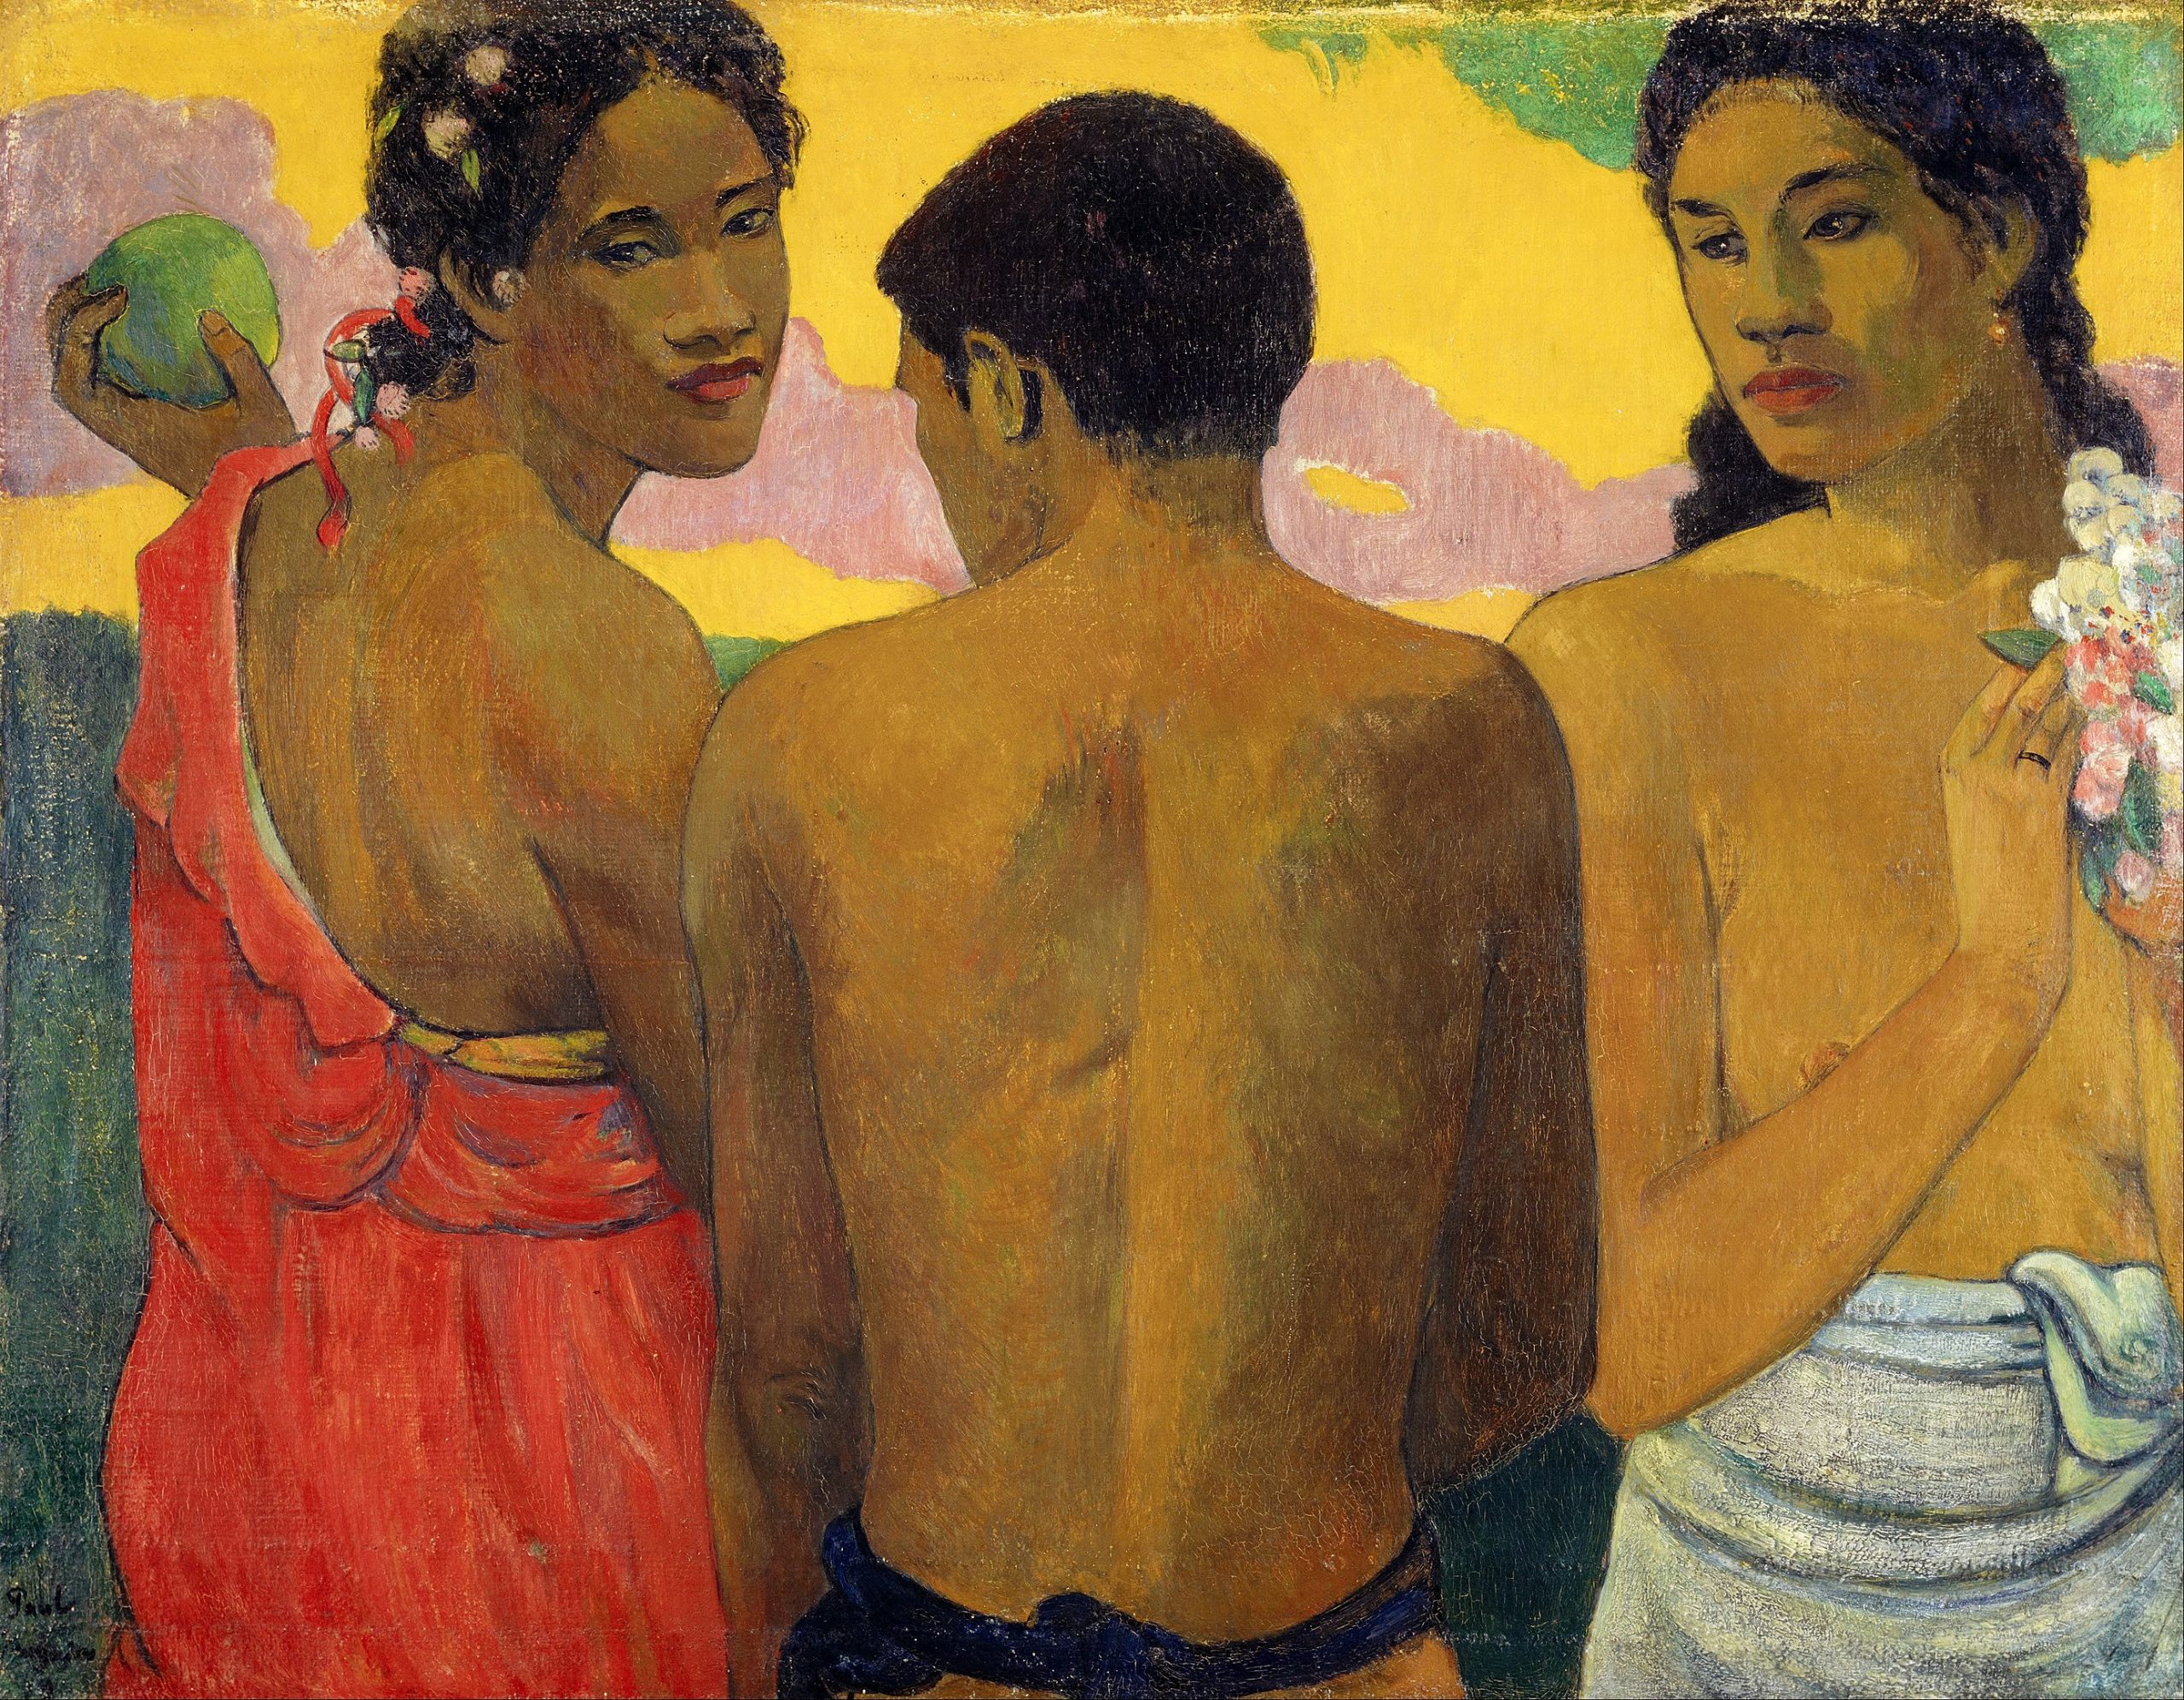 A man with his back turned towards the viewer standing between two women, one holding a fruit and the other, flowers